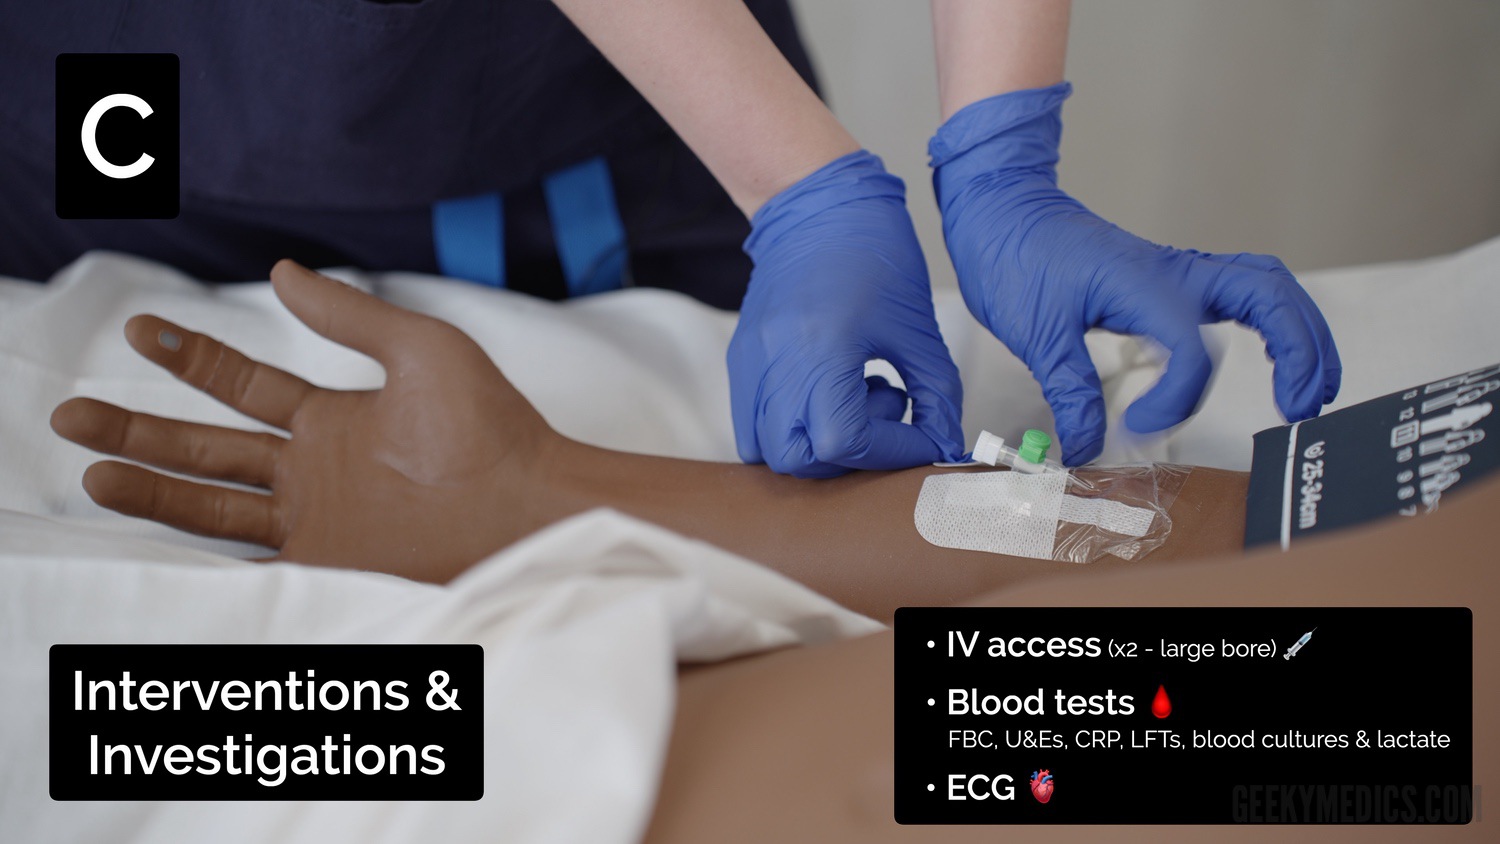 Consider IV access to facilitate fluid/drug administration & blood tests